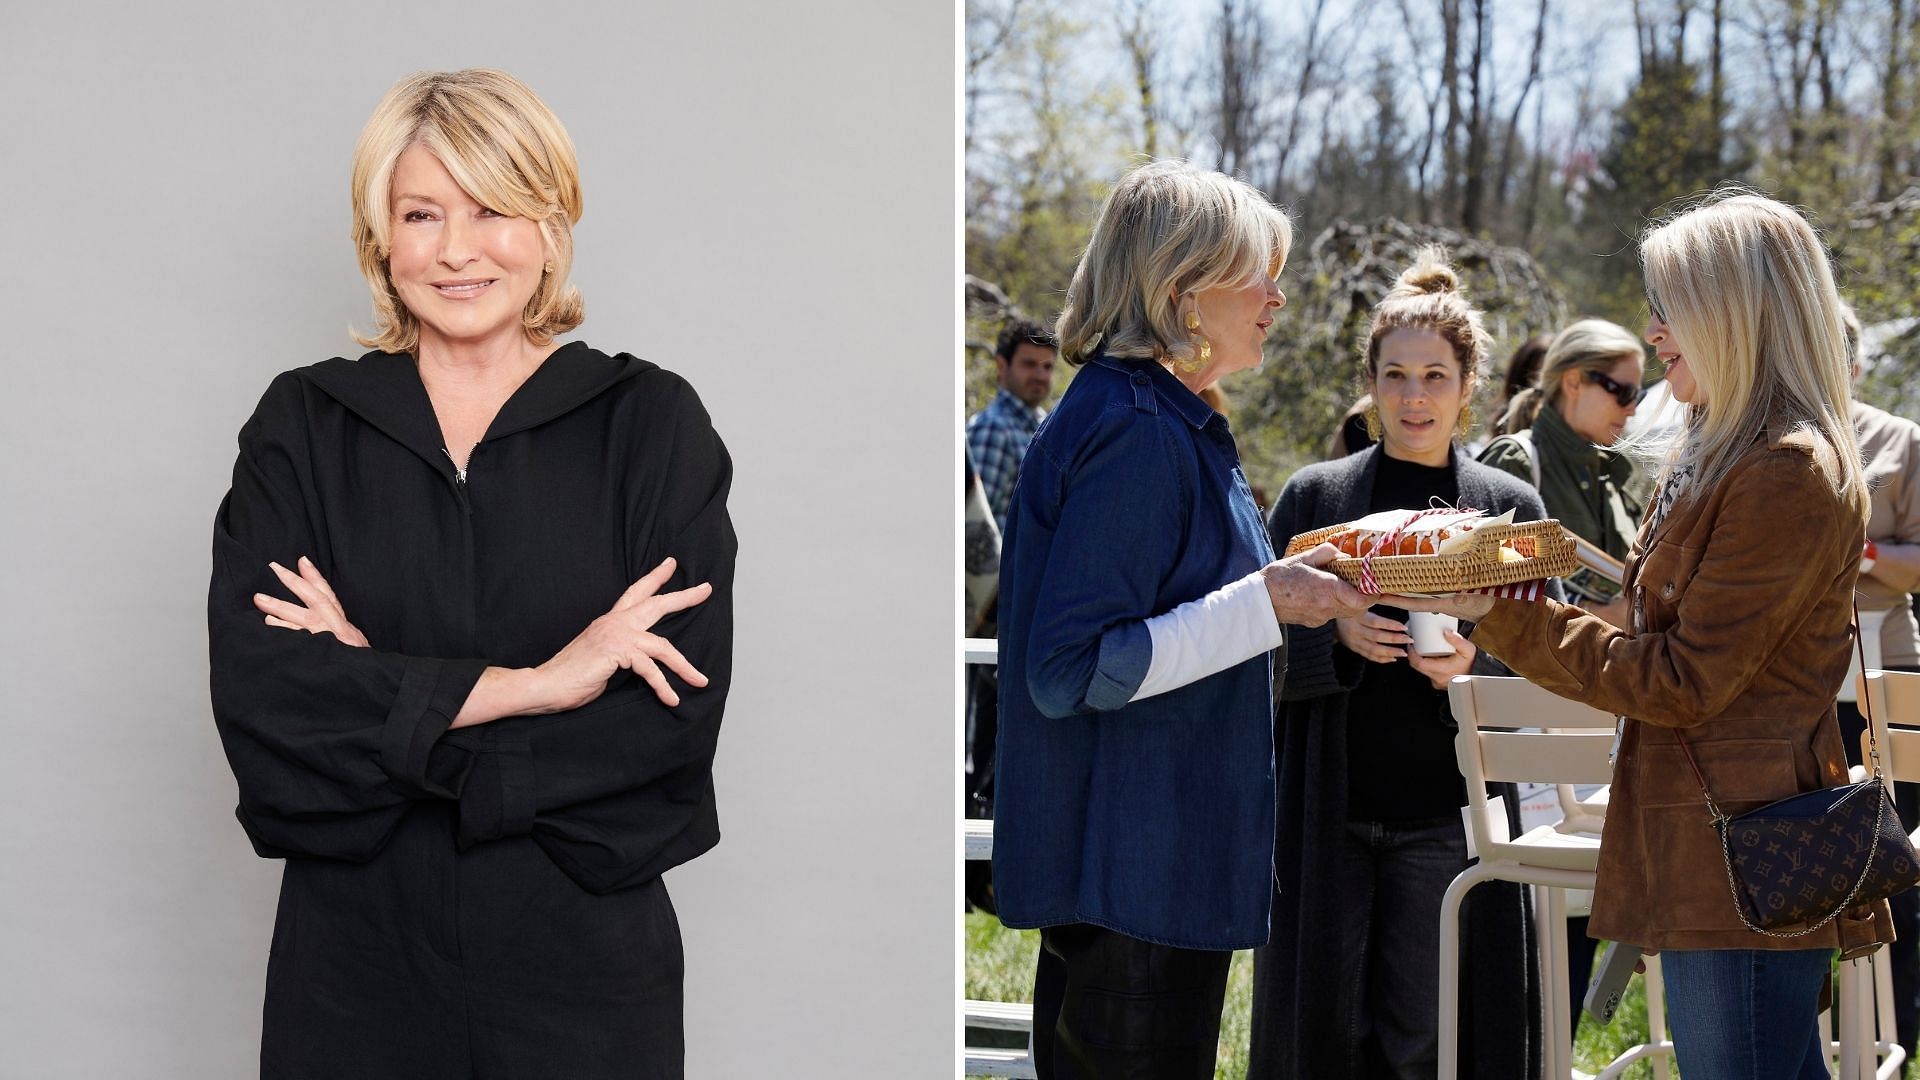 Legendary businesswoman Martha Stewart comes up with a unique sale of her prized possessions (Image via ABC/Peter Yang, Eric Liebowitz)